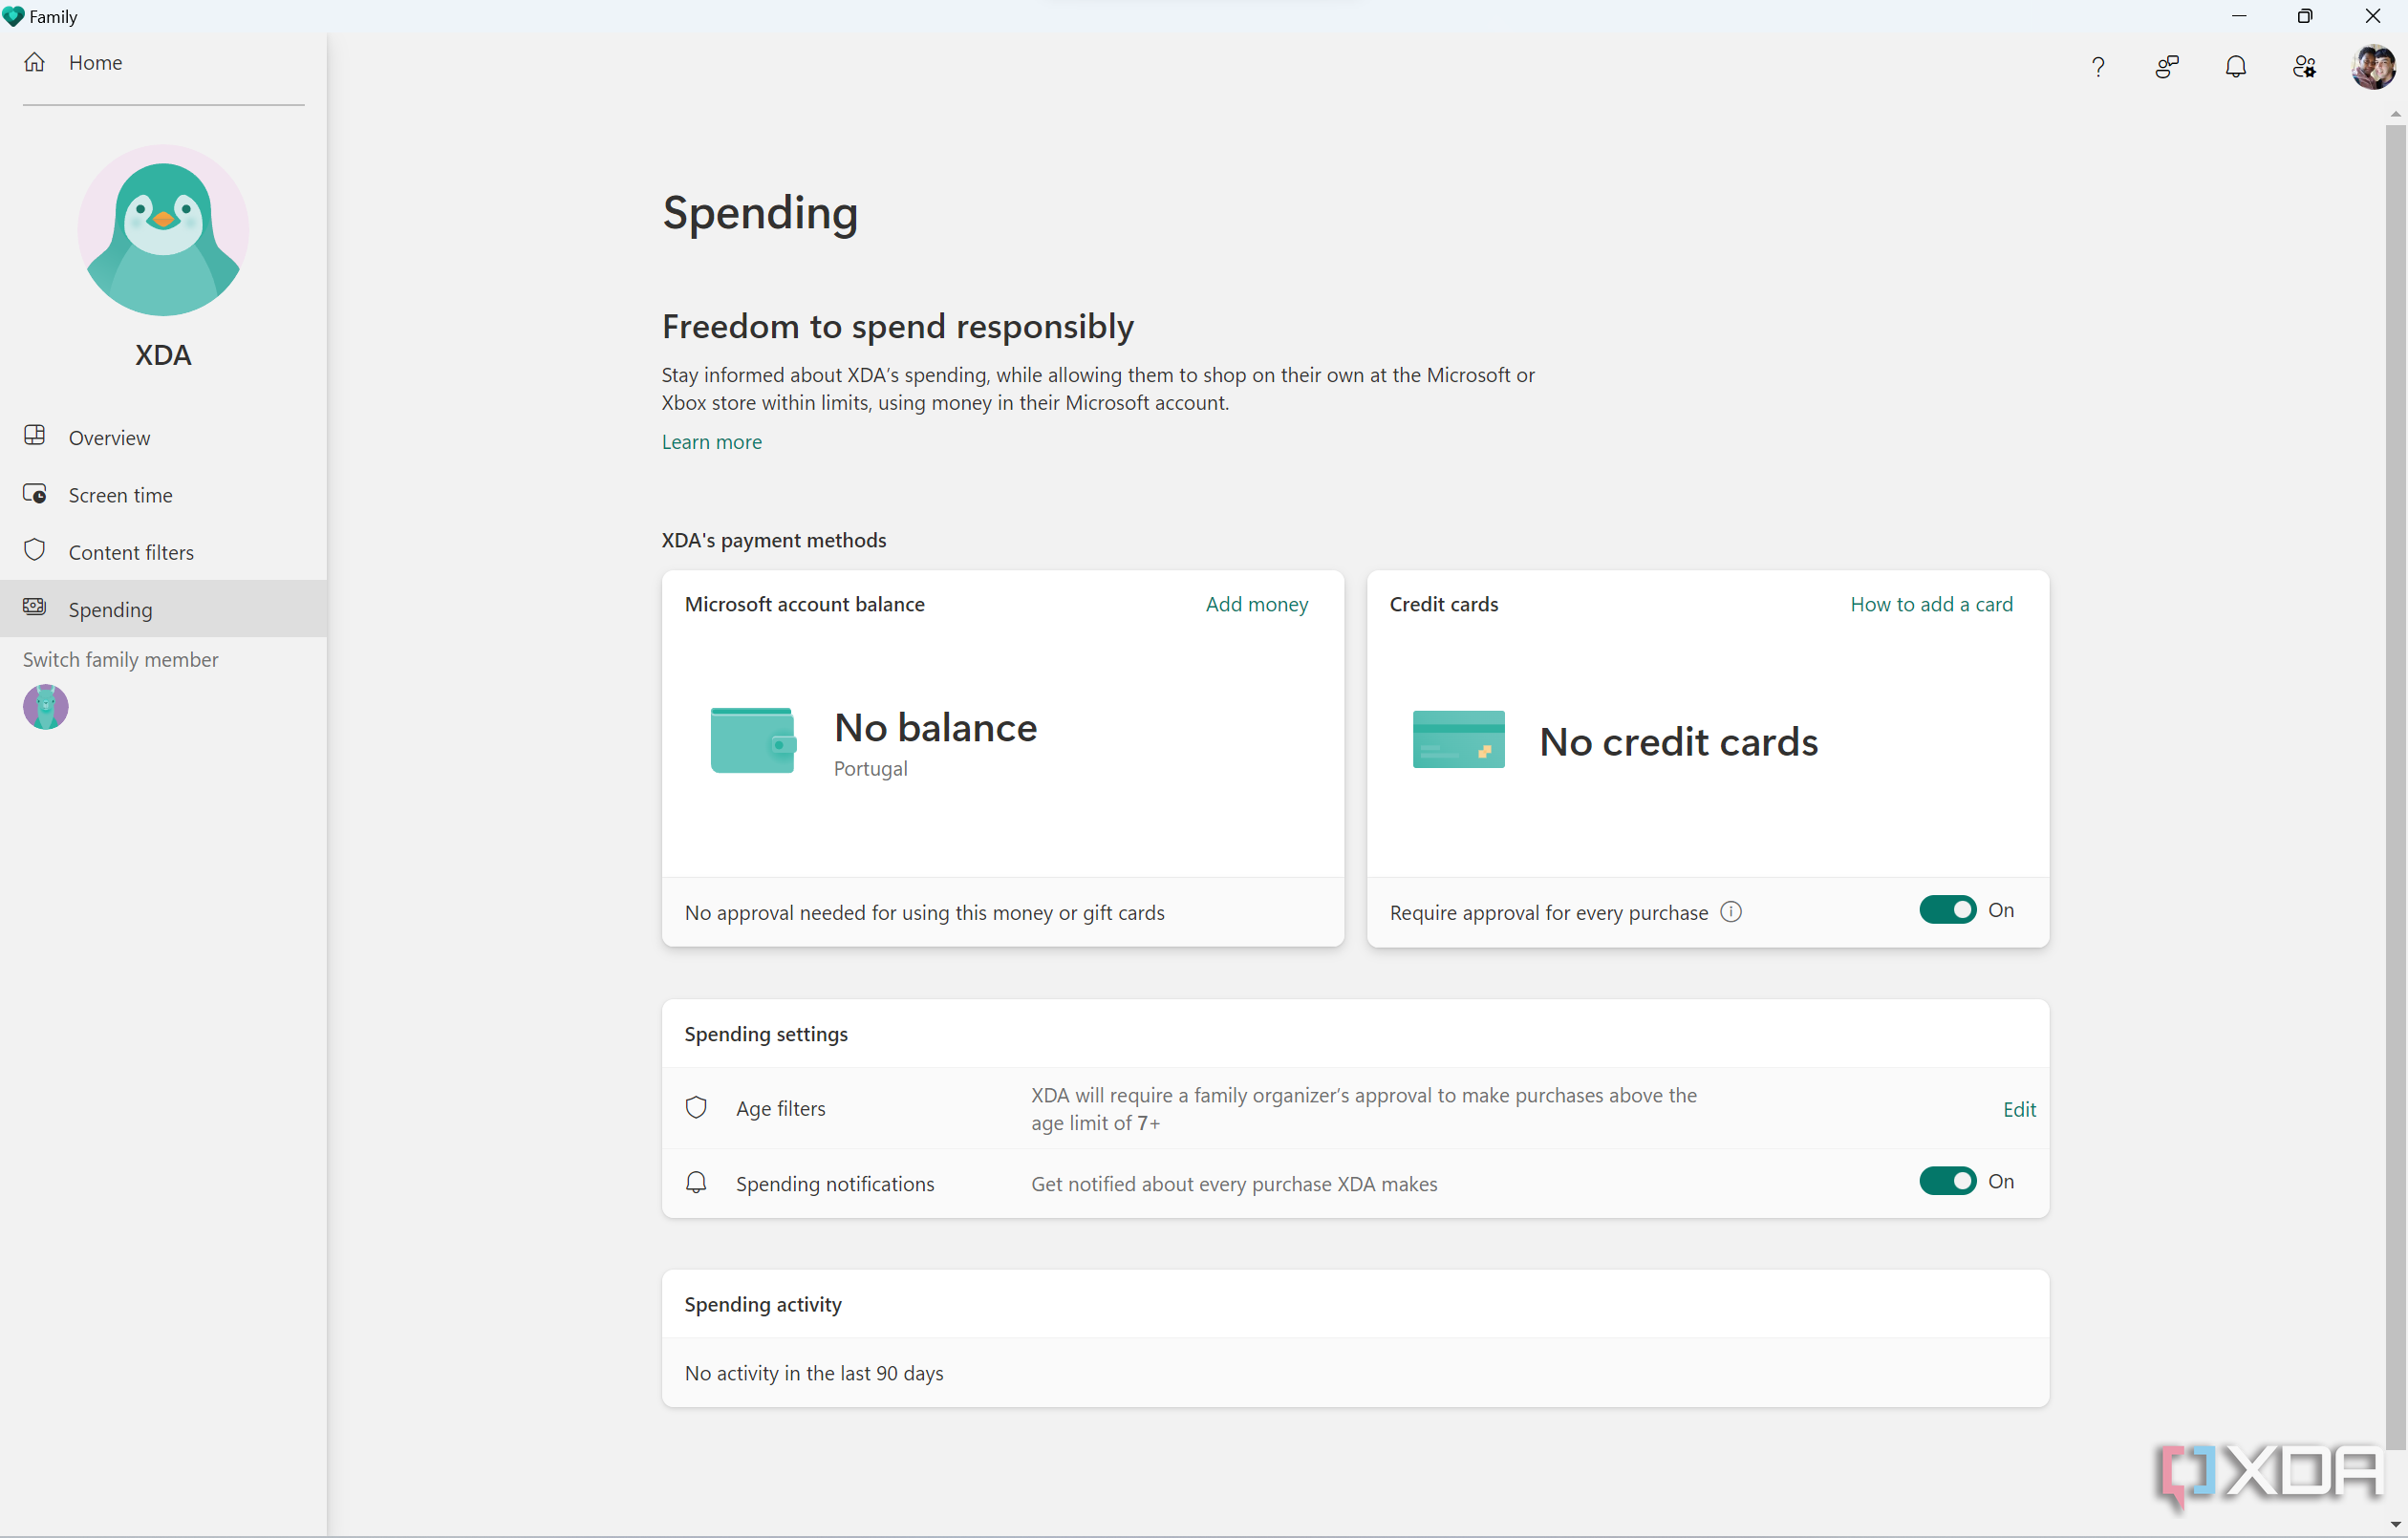 Screenshot of the Spending section in Microsoft Family app